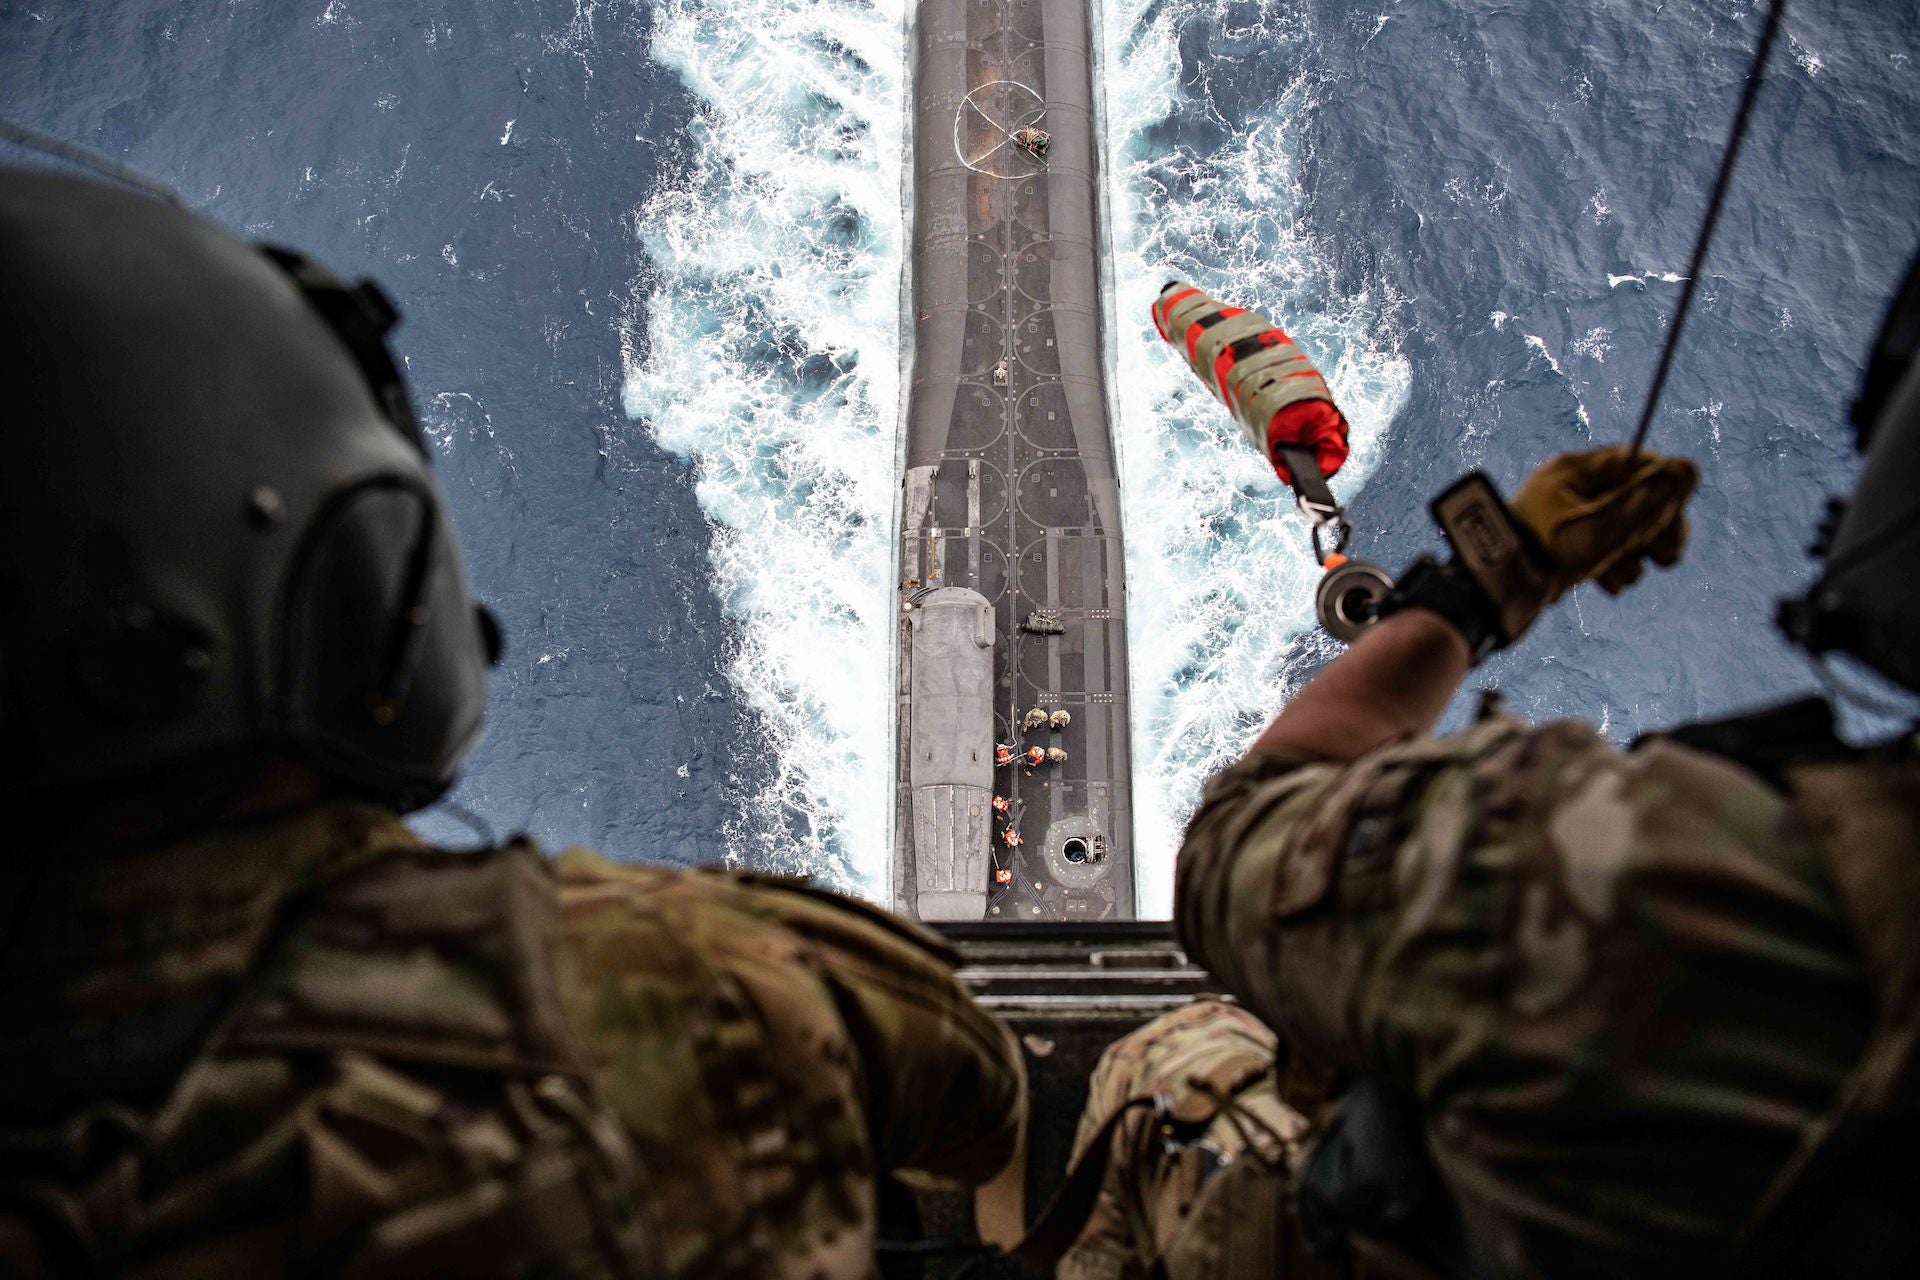 MEDITERRANEAN SEA (Feb. 26, 2023) East-Coast-based U.S. Naval Special Warfare Operators (SEALs) participate in a special operations forces interoperability exercise aboard Ohio-class guided-missile submarine USS Florida (SSGN 728) and a CV-22 Osprey, assigned to 7th Special Operations Squadron, 352nd Special Operations Wing, Feb. 26, 2023. These  operations demonstrate U.S. European Command’s ability to rapidly deploy Special Operations Forces throughout the theater at a time and place of our choosing, and the U.S. commitment to train with Allies and partners to deploy and fight as multinational forces and SOF to meet today’s challenges. (U.S. Air Force photo by Tech Sgt. Westin Warburton)